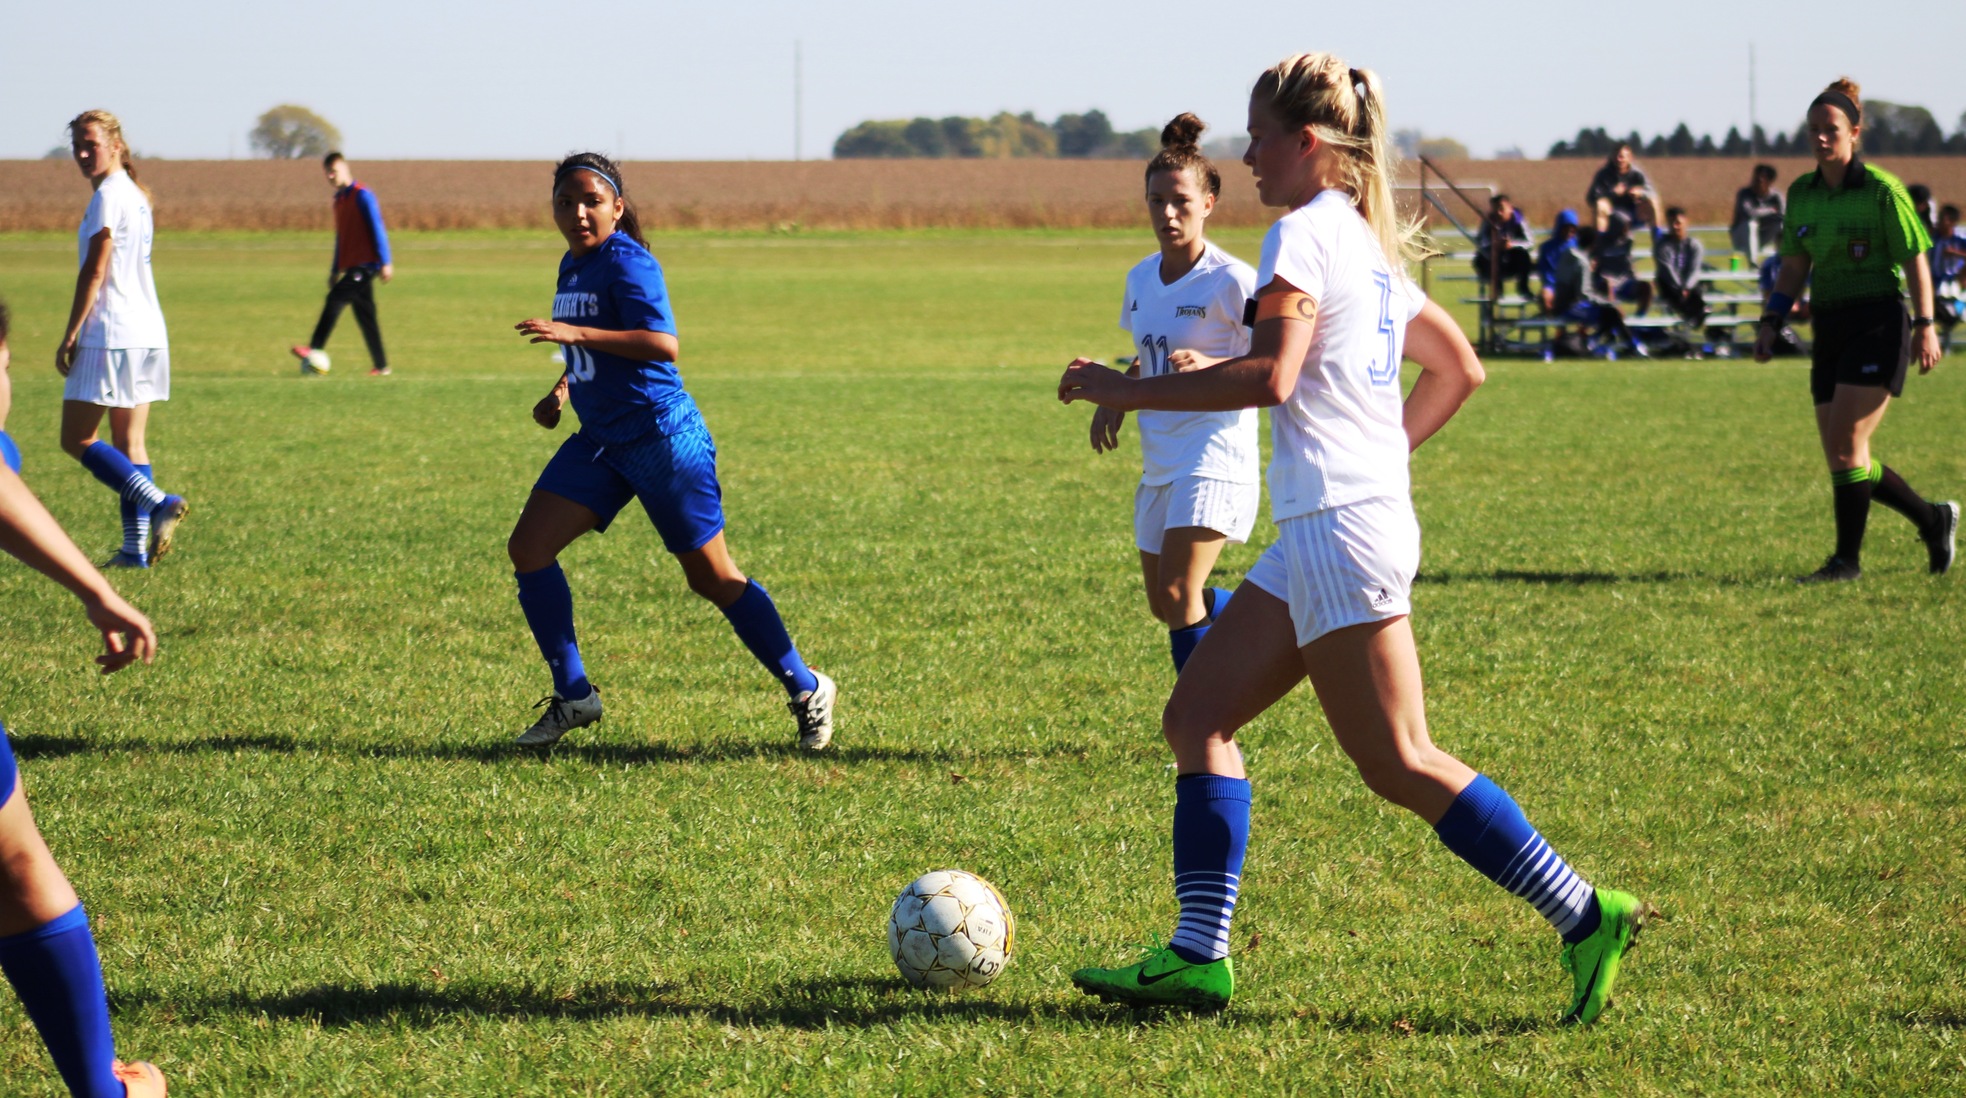 NIACC's Kirrilly Hughes moves the ball up the field in home match last season against DCTC.